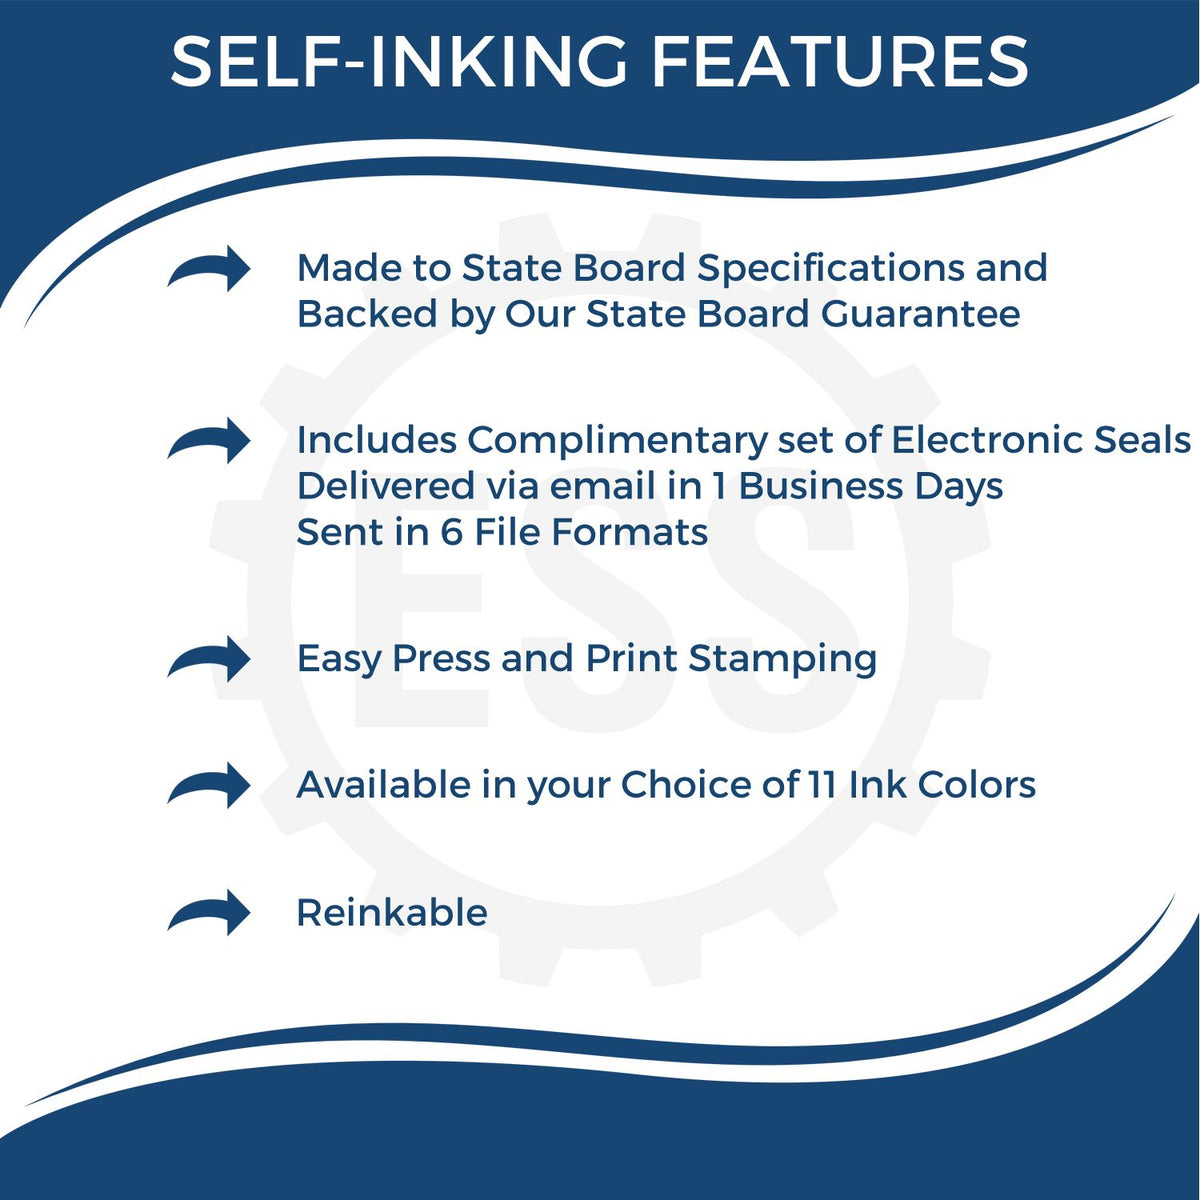 A picture of an infographic highlighting the selling points for the Self-Inking Rectangular Colorado Notary Stamp